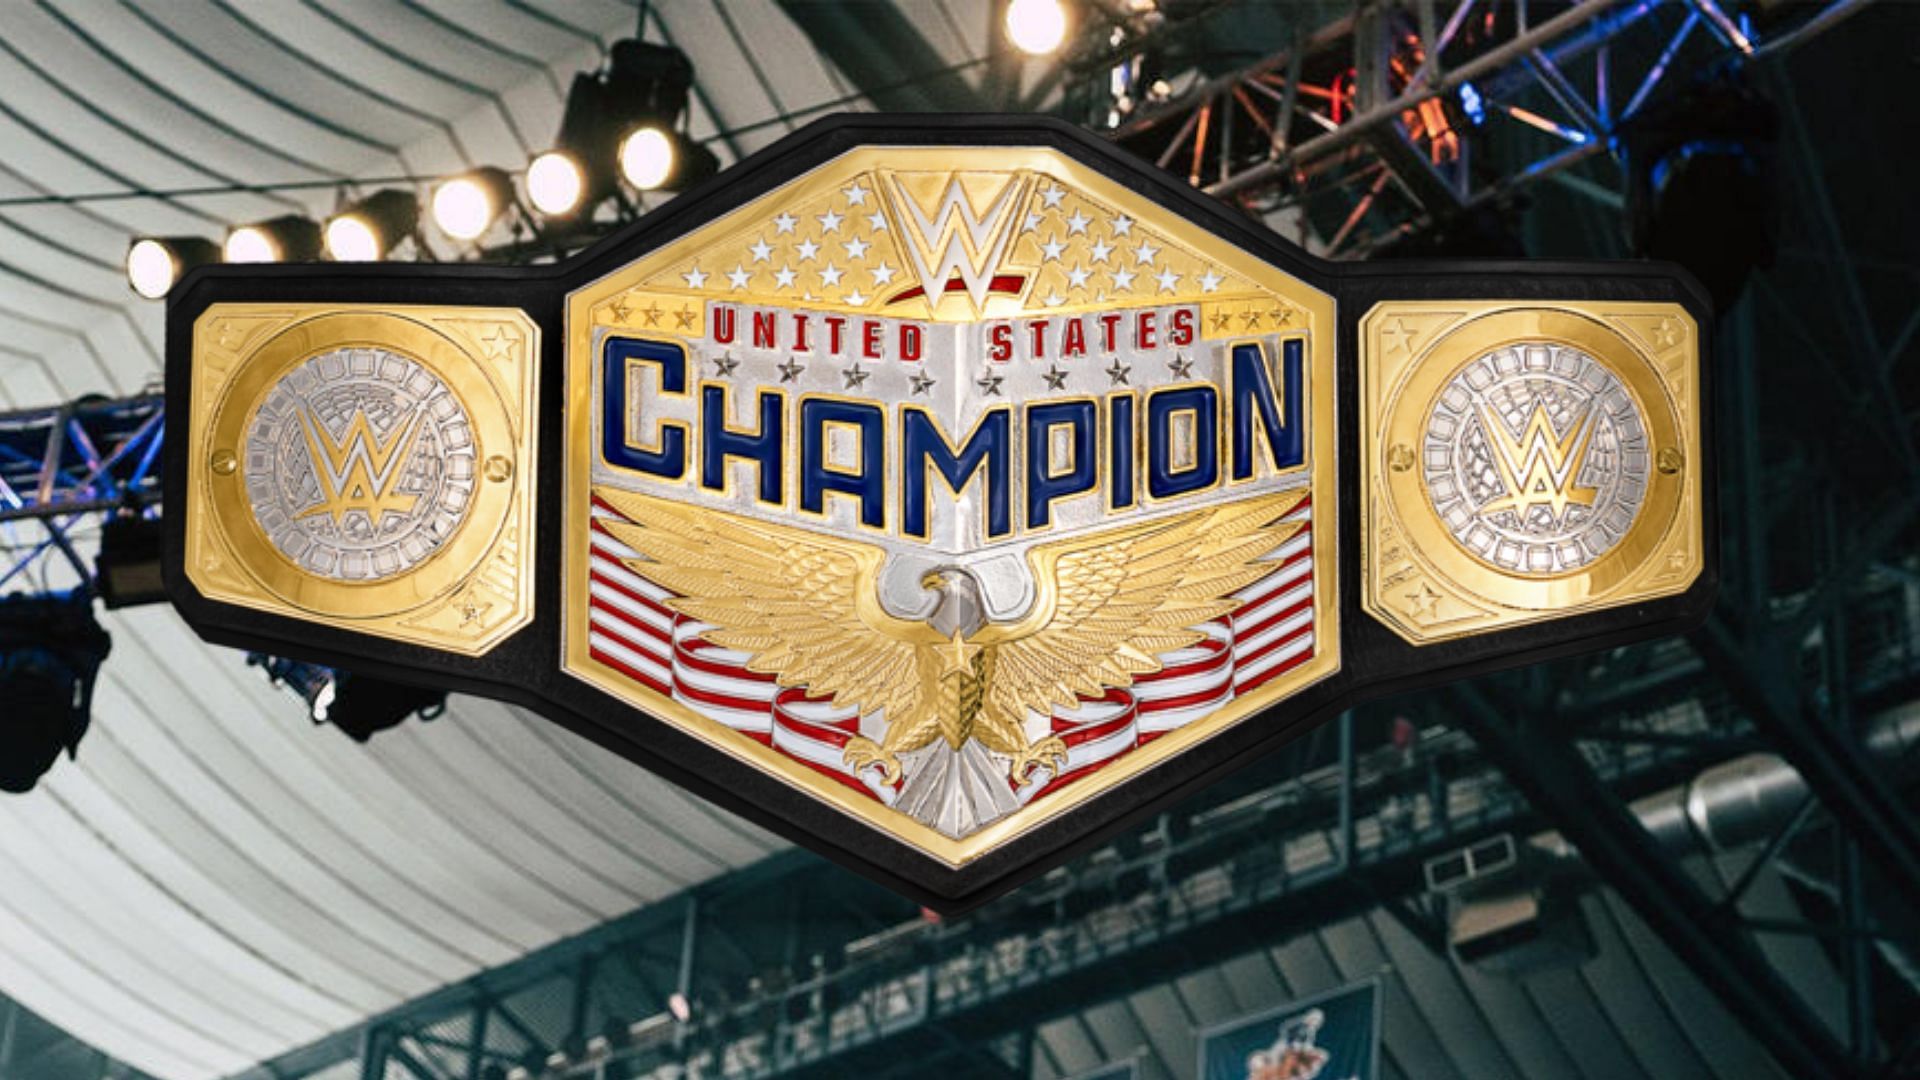 New United States title was introduced in 2020!